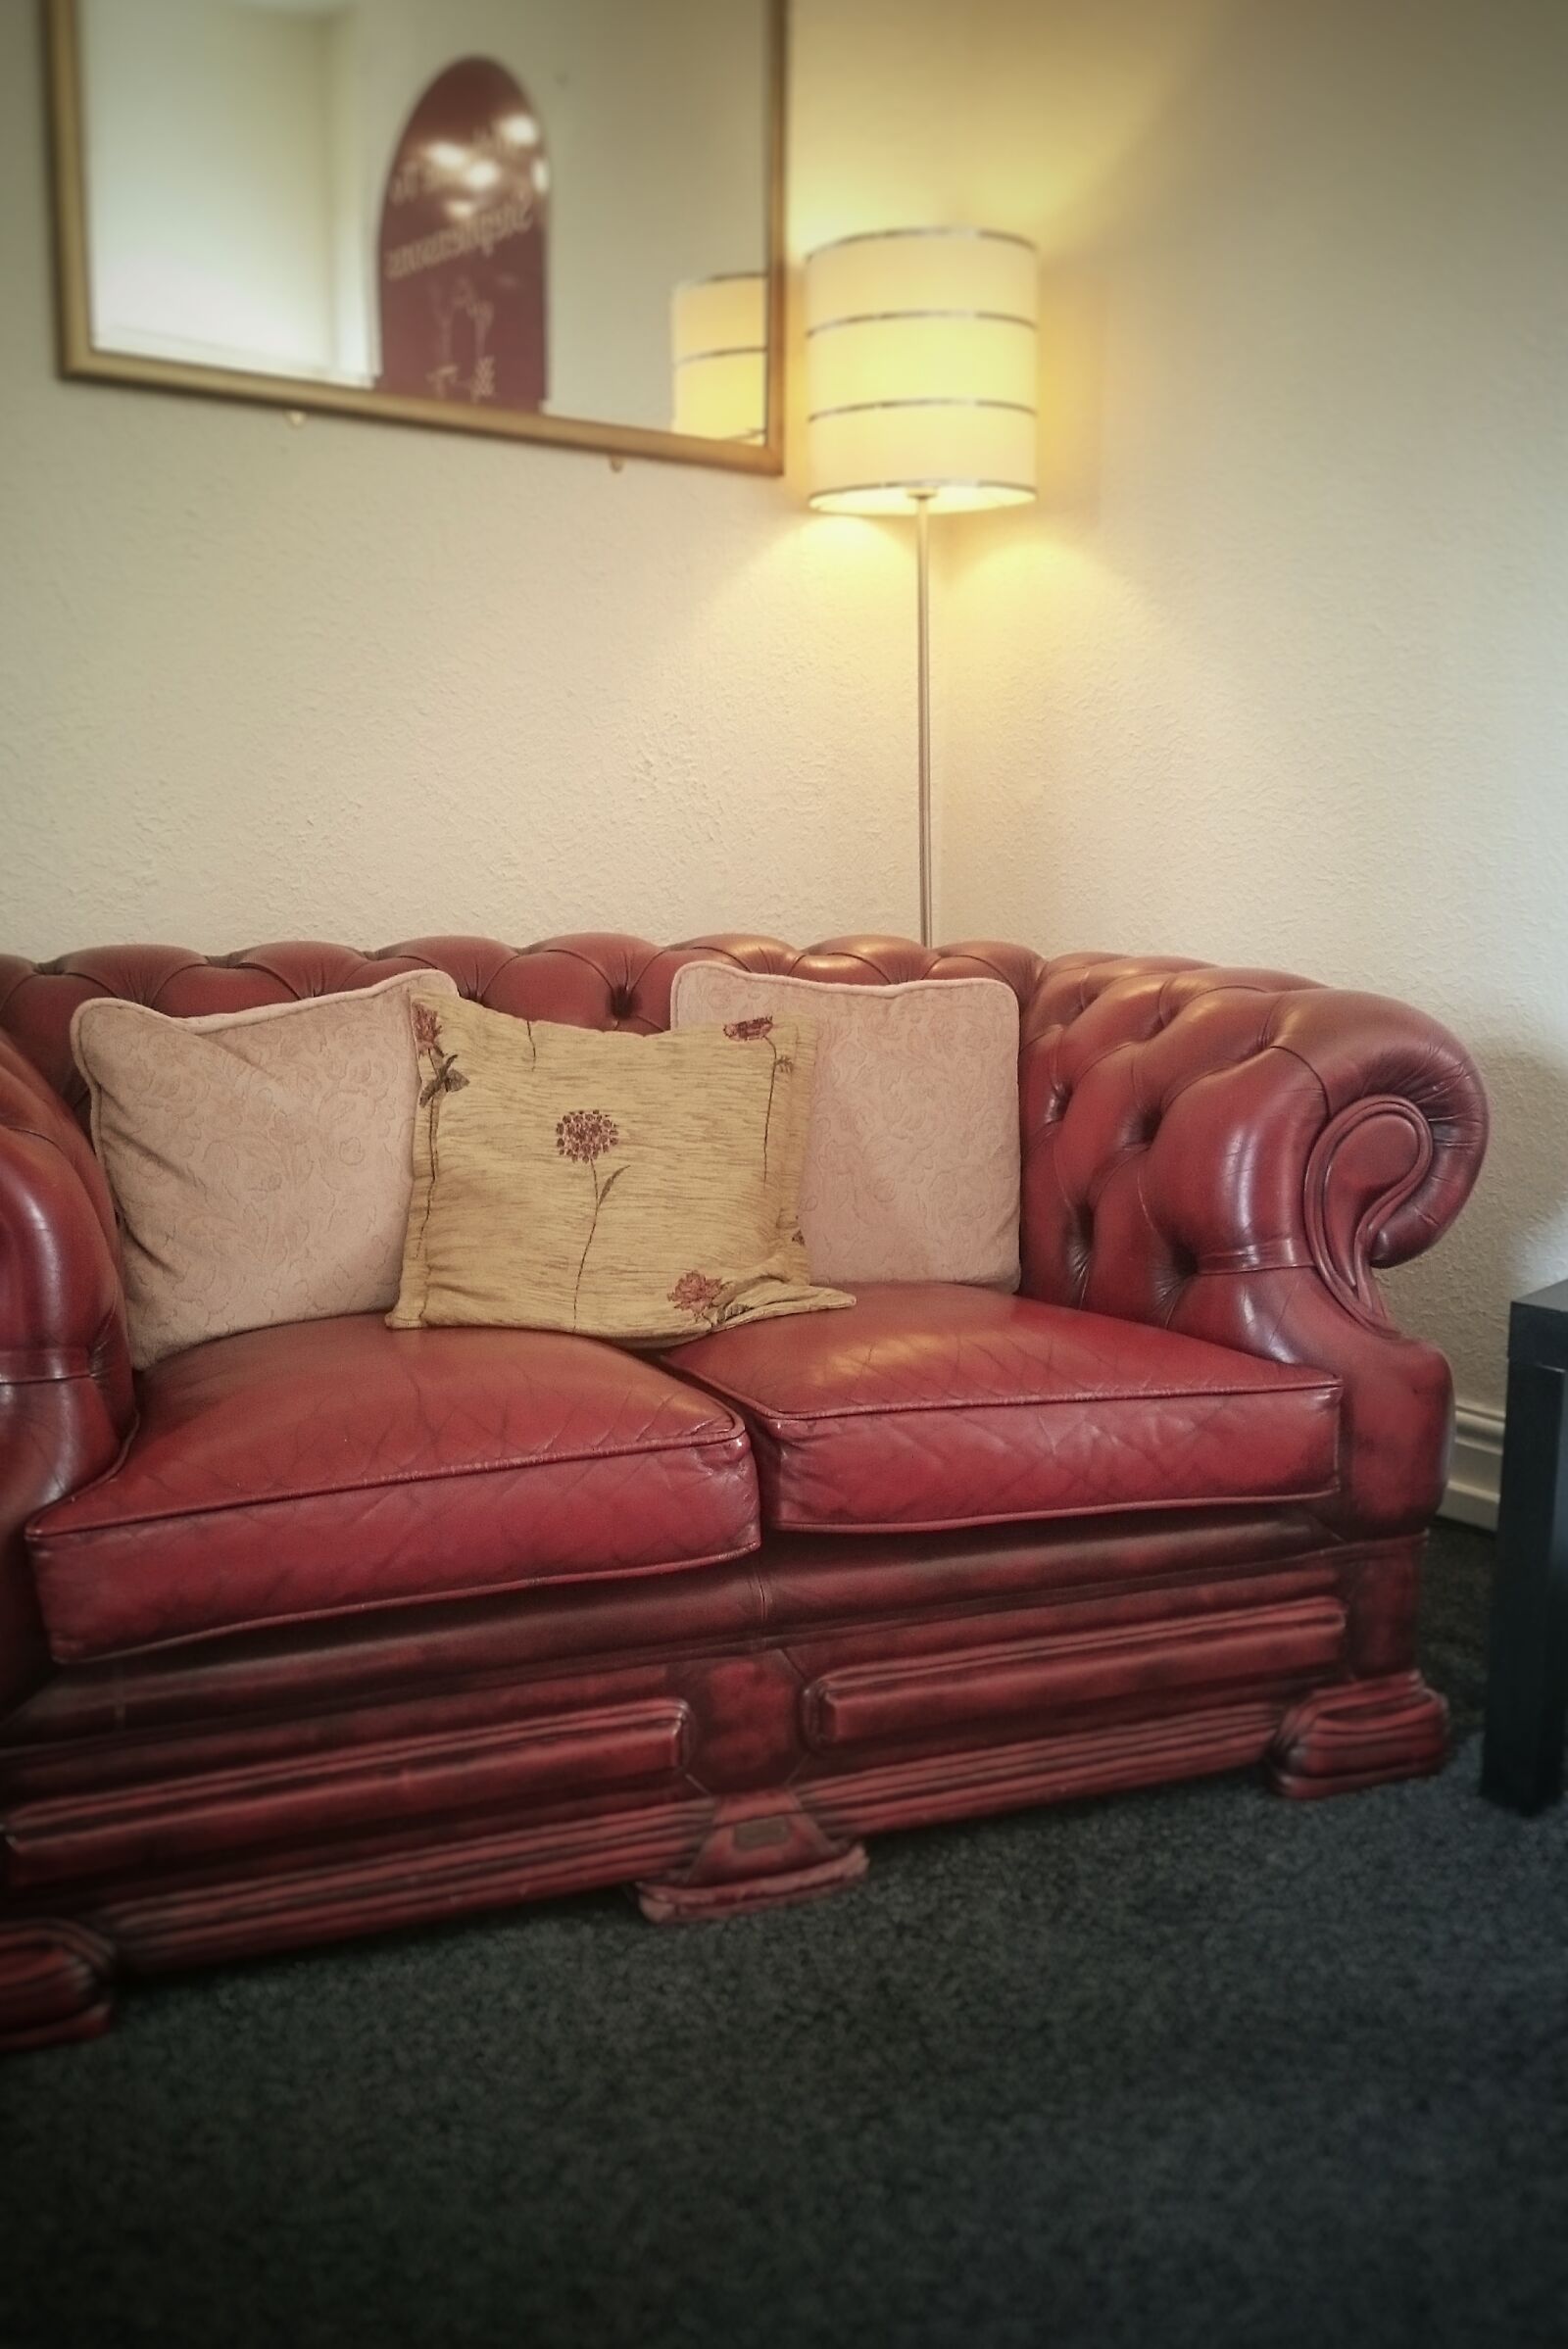 Sony Xperia Z3 Compact sample photo. Chesterfield, leather, seat, red photography